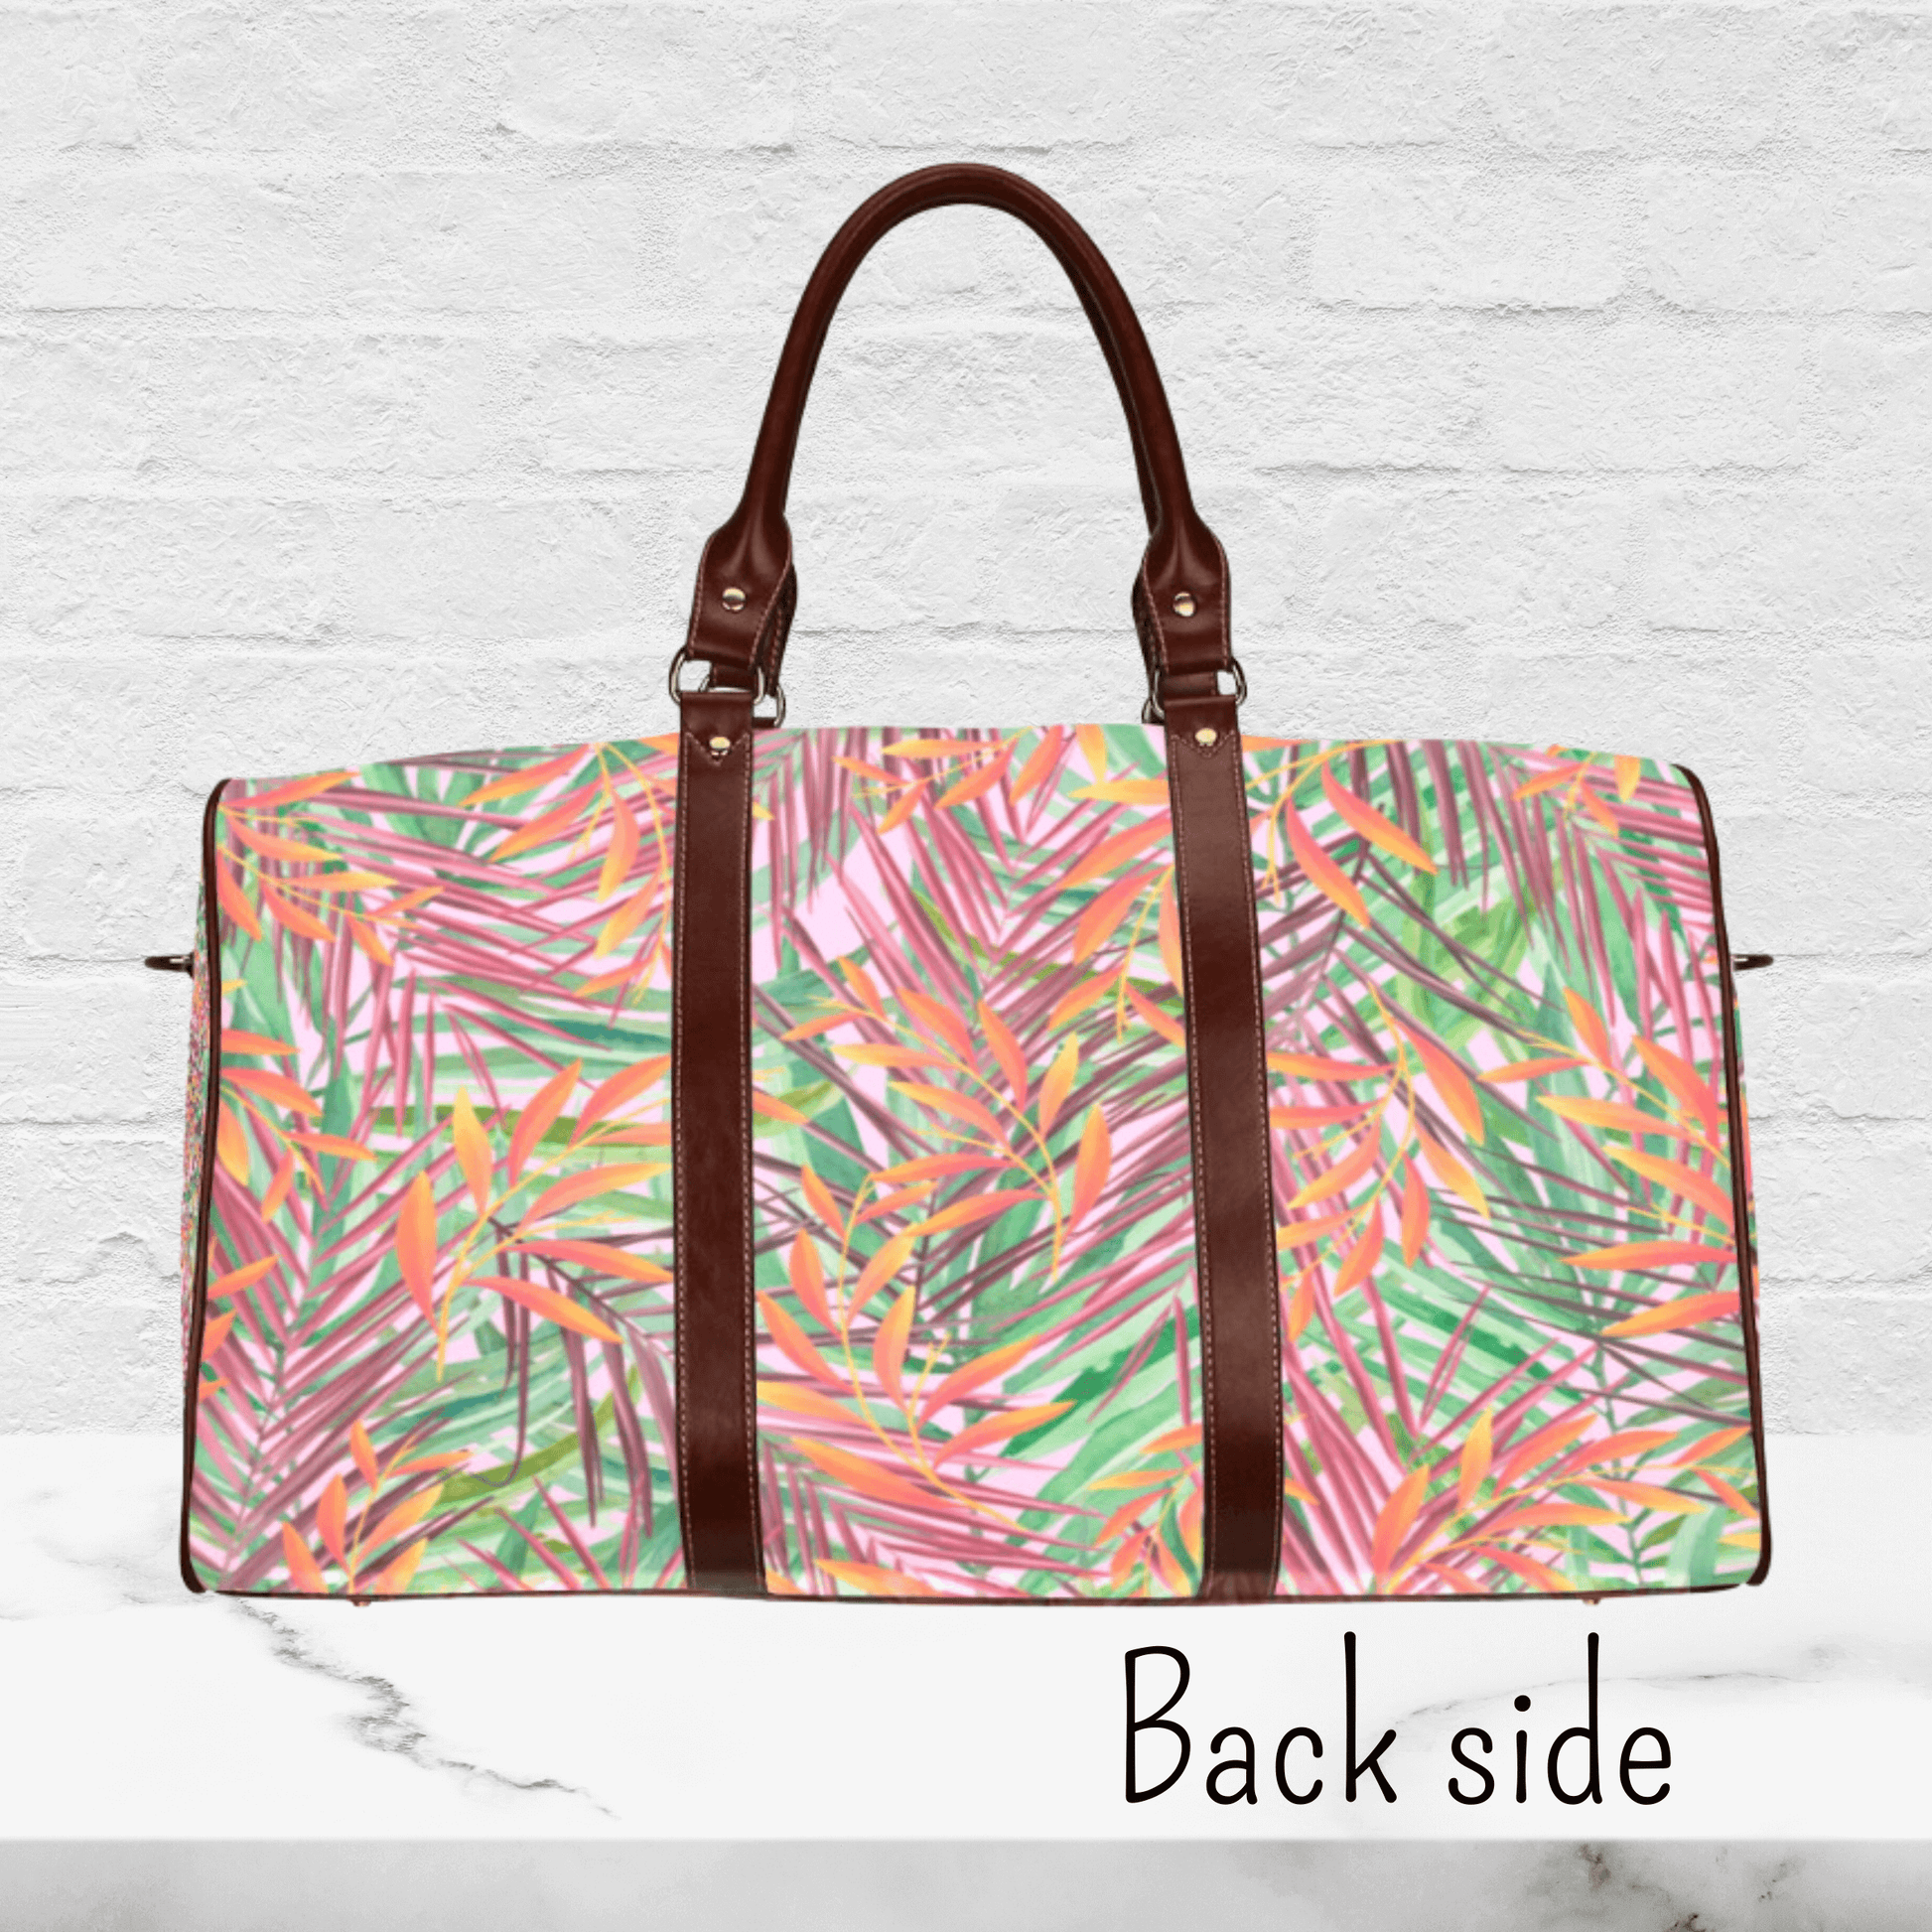 The back side of our weekender bag has the same tropical print.